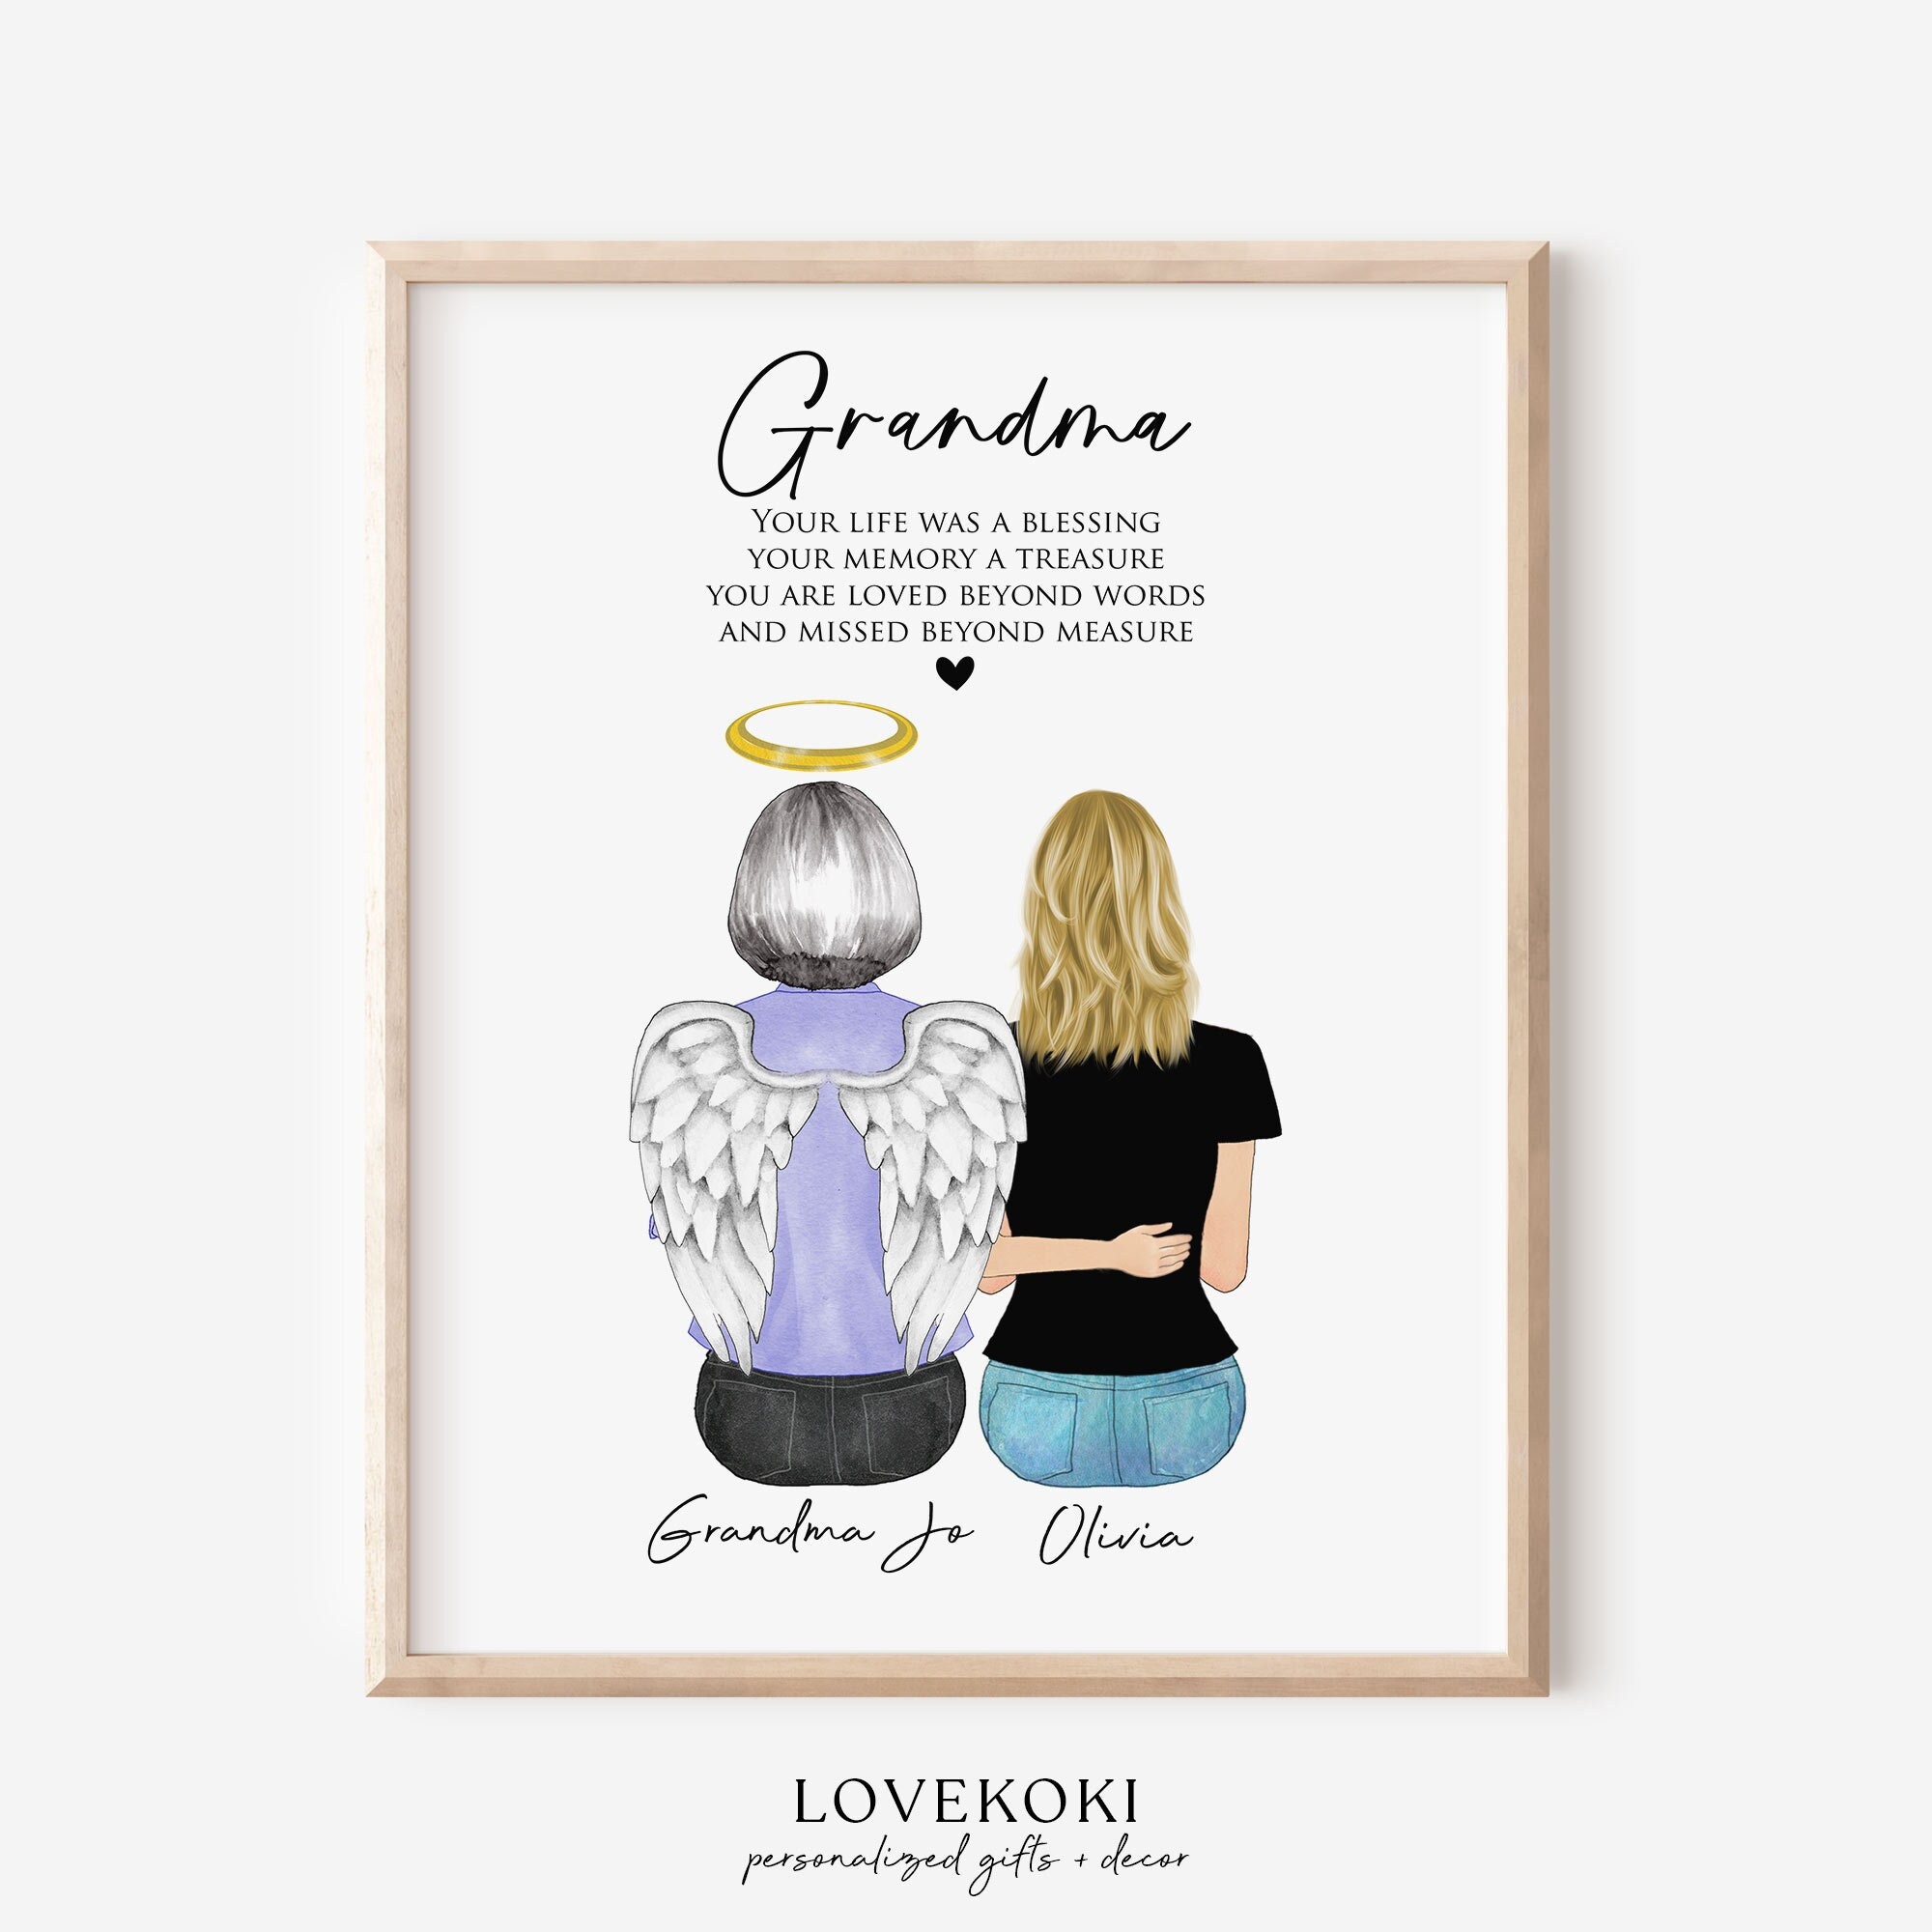  Personalized Memorial Gifts – Custom Diamond Art Kits with  Photo Text, Sympathy Gifts, Bereavement Gifts, Remembrance Gifts for Loss  of Father Mother Loved One (Round Drill, 11.8×15.7 Inch) : Arts, Crafts